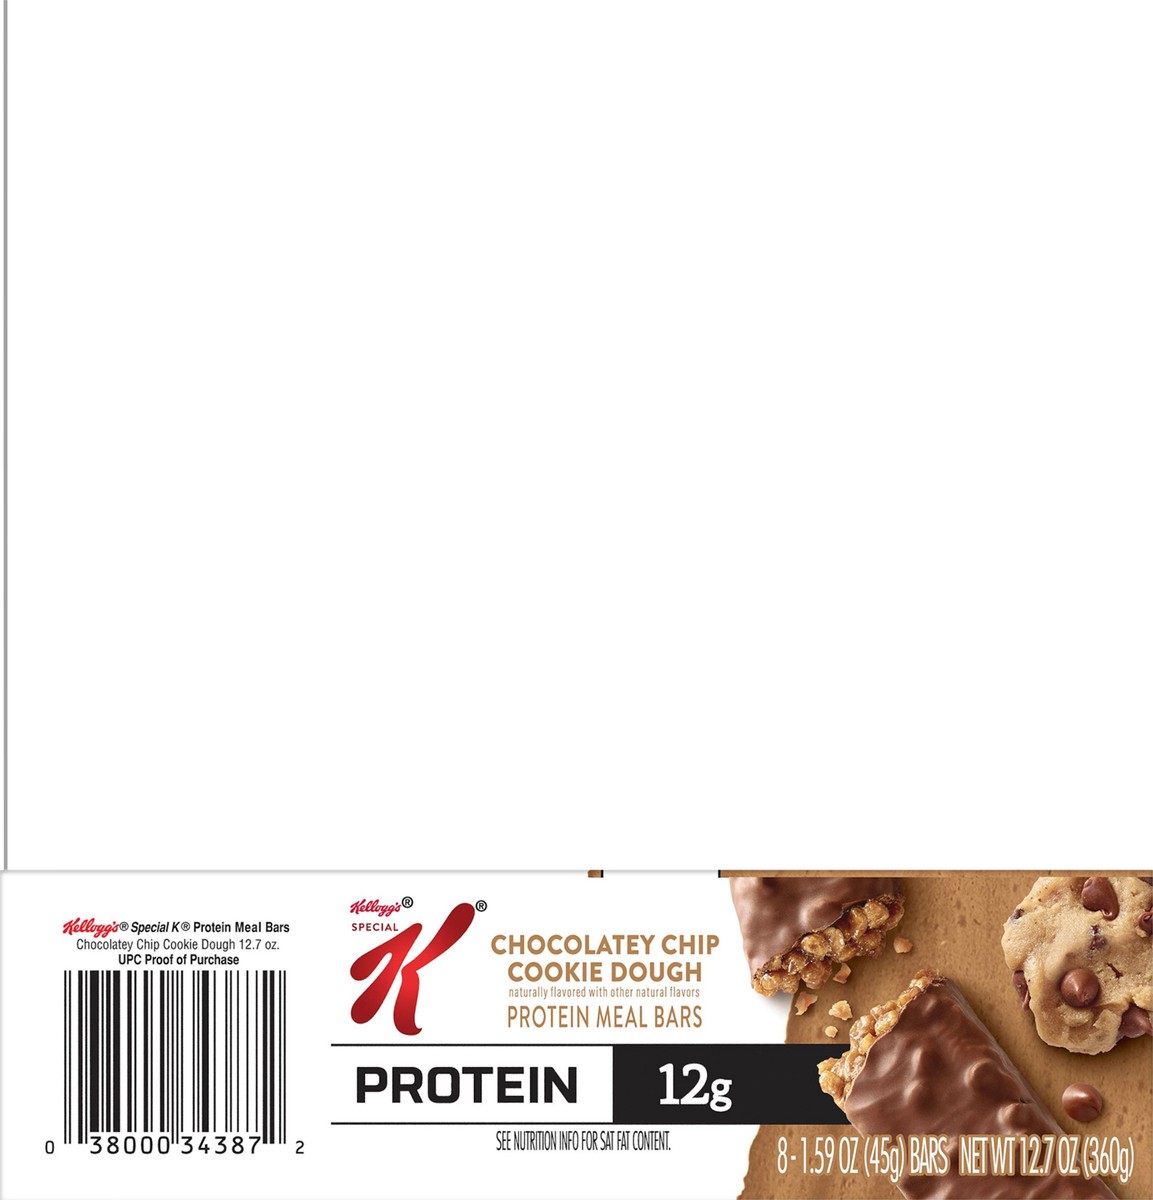 slide 11 of 14, Special K Kellogg's Special K Protein Meal Bars, Chocolatey Chip Cookie Dough, 12.7 oz, 8 Count, 12.7 oz